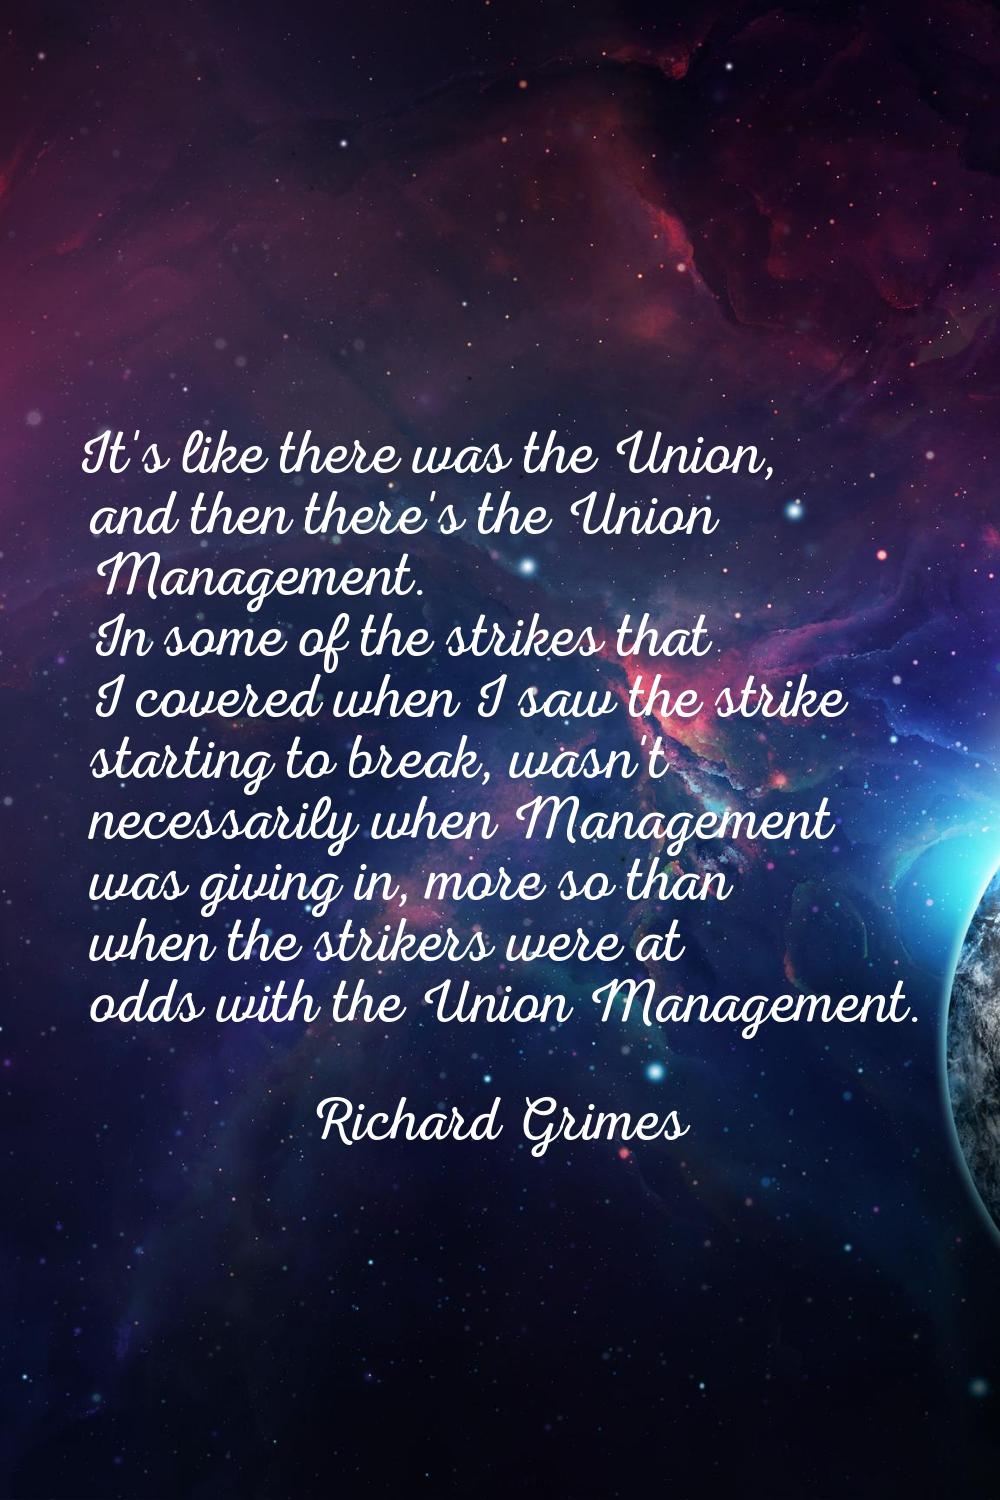 It's like there was the Union, and then there's the Union Management. In some of the strikes that I